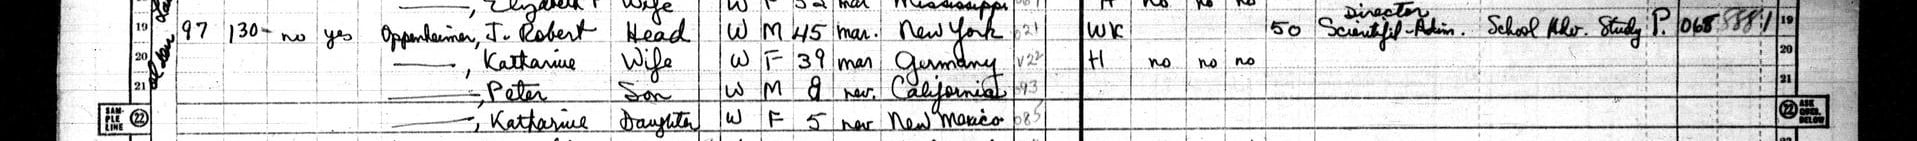 Oppenheimer and his family listed in the 1950 U.S. Census on MyHeritage